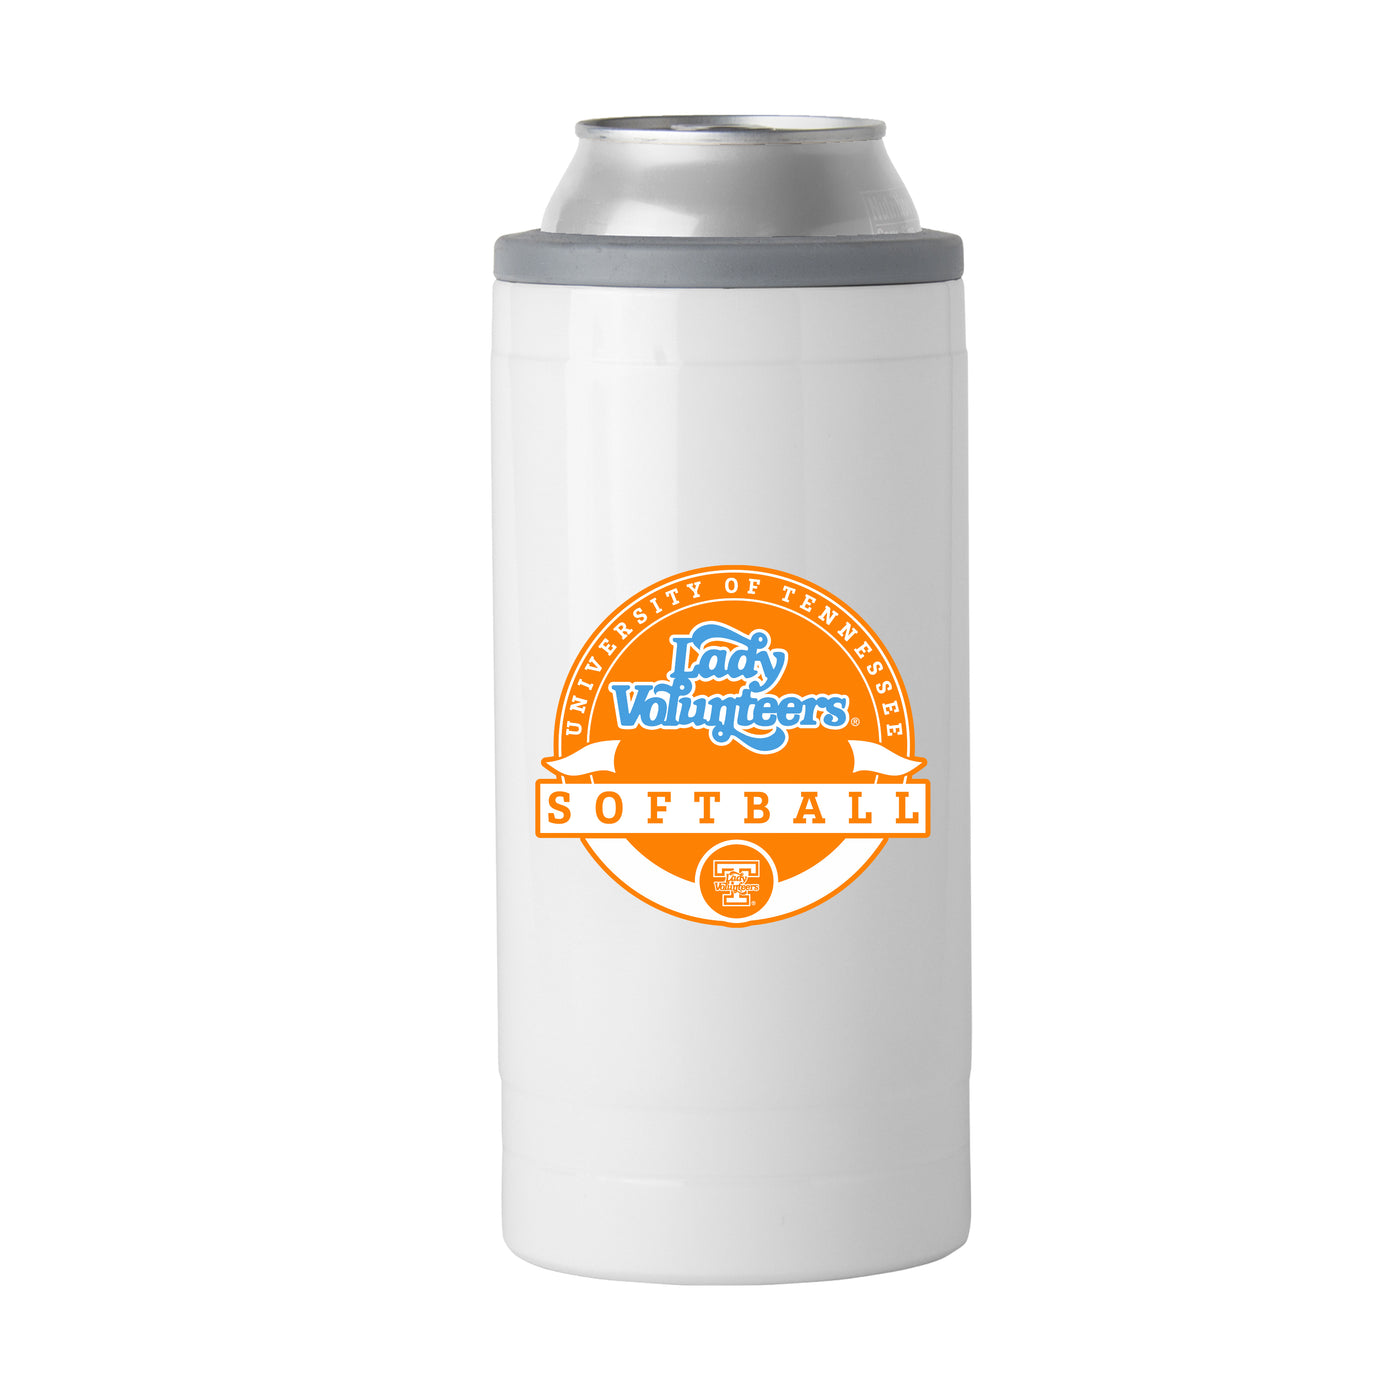 Tennessee Lady Vols Softball 12oz Slim Can Coolie